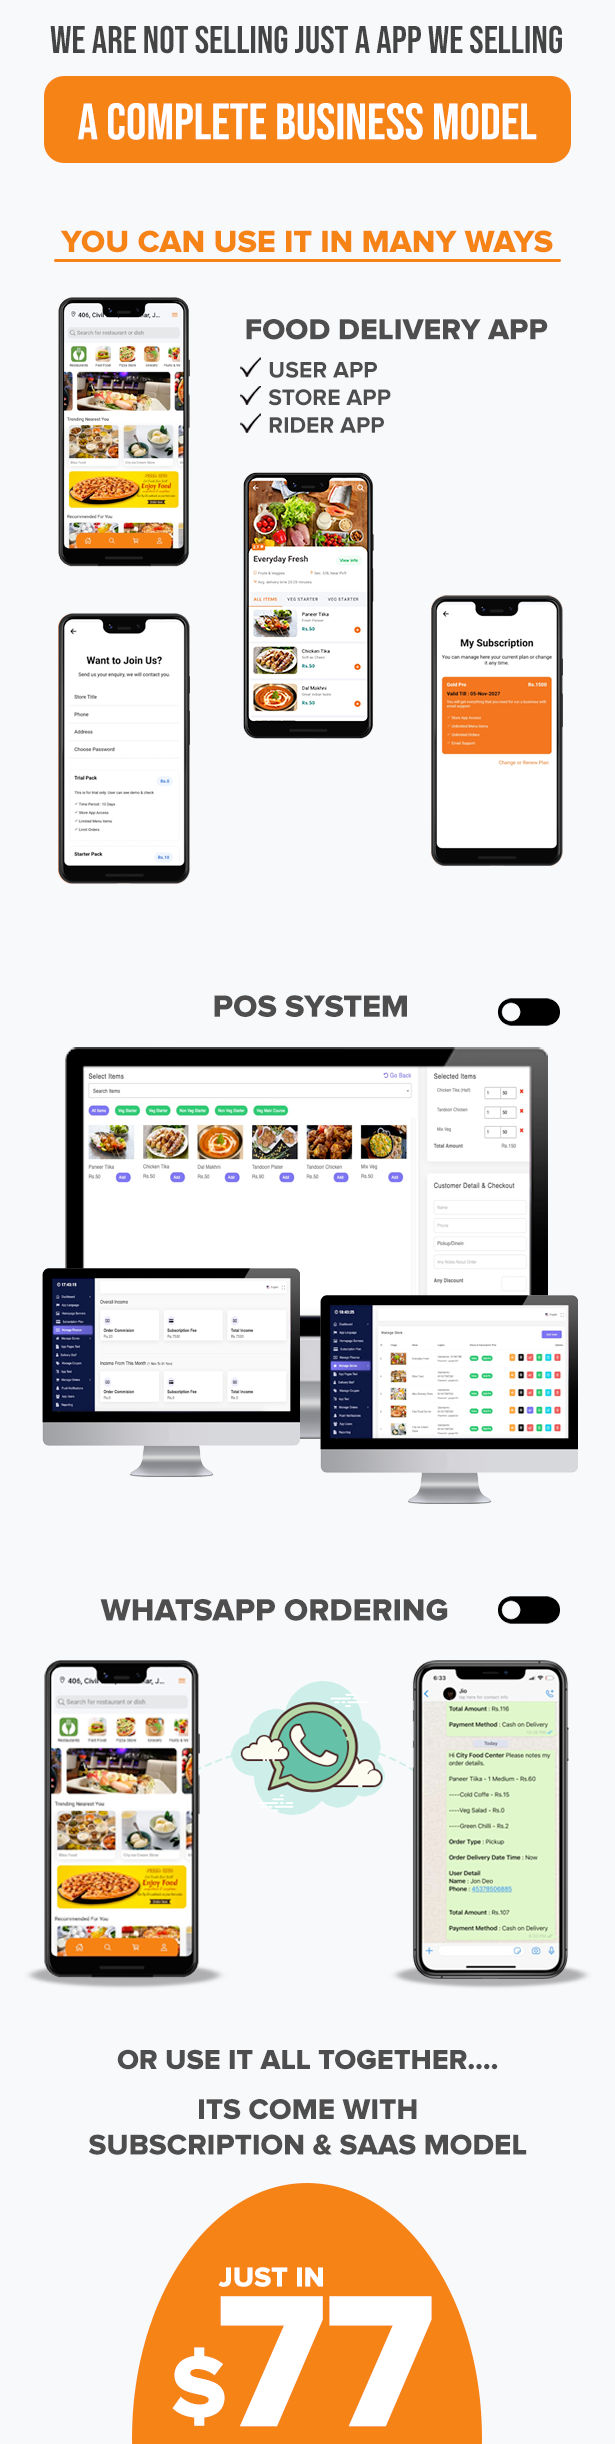 Food Delivery App + POS System + WhatsApp Ordering - Complete SaaS Solution (ionic 5 & Laravel) - 3